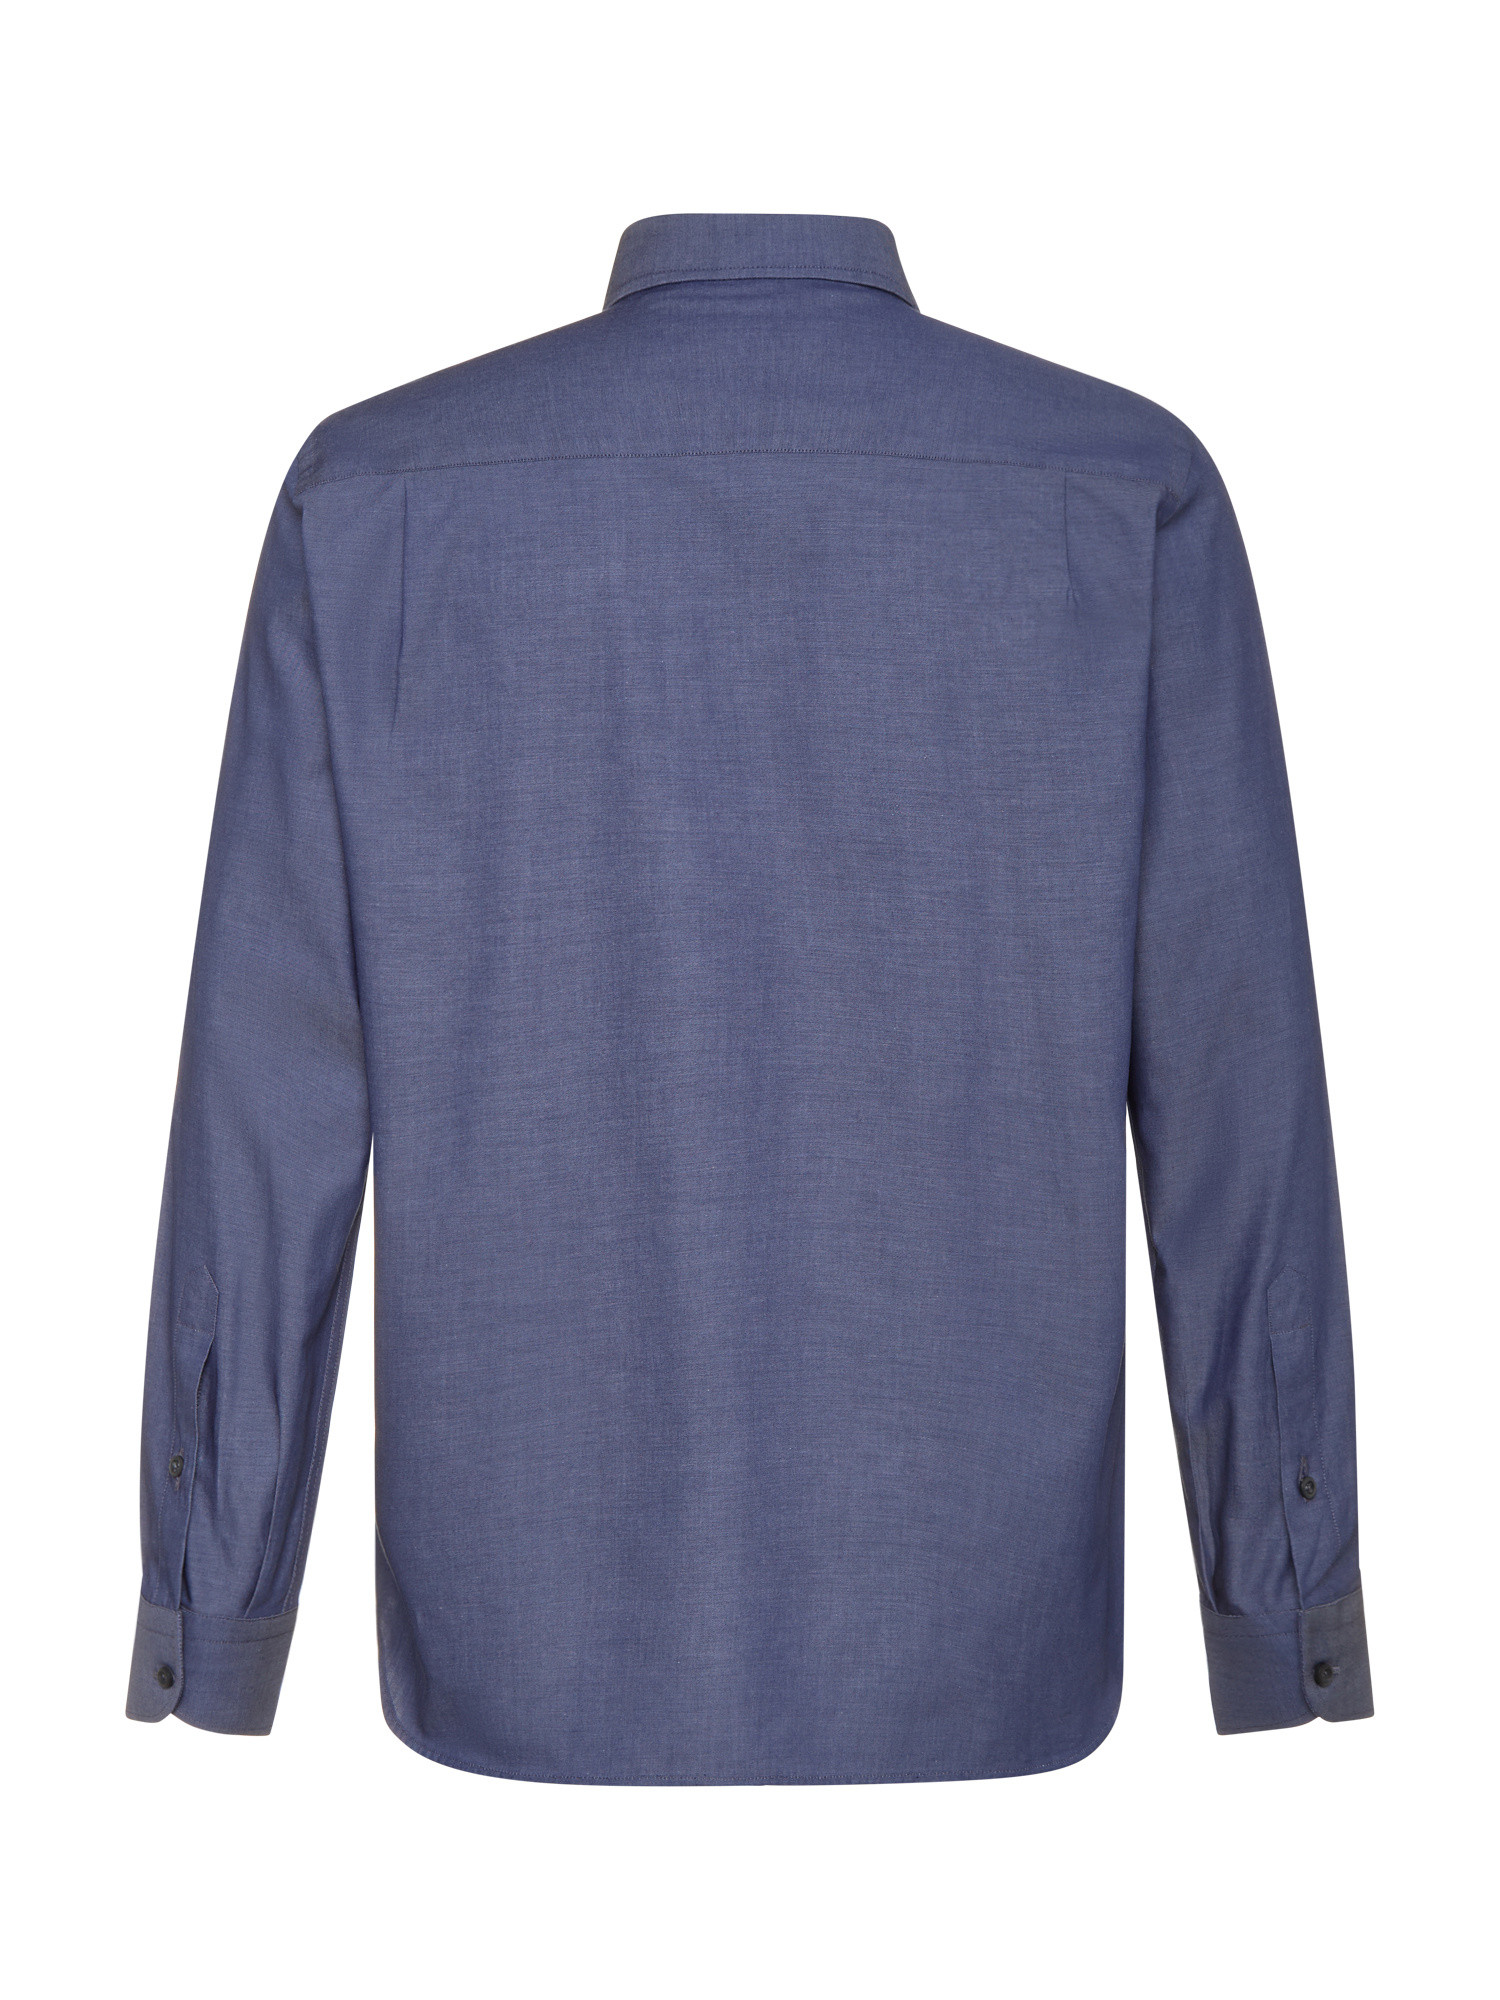 Luca D'Altieri - Regular fit casual shirt in pure cotton twill, Blue, large image number 2